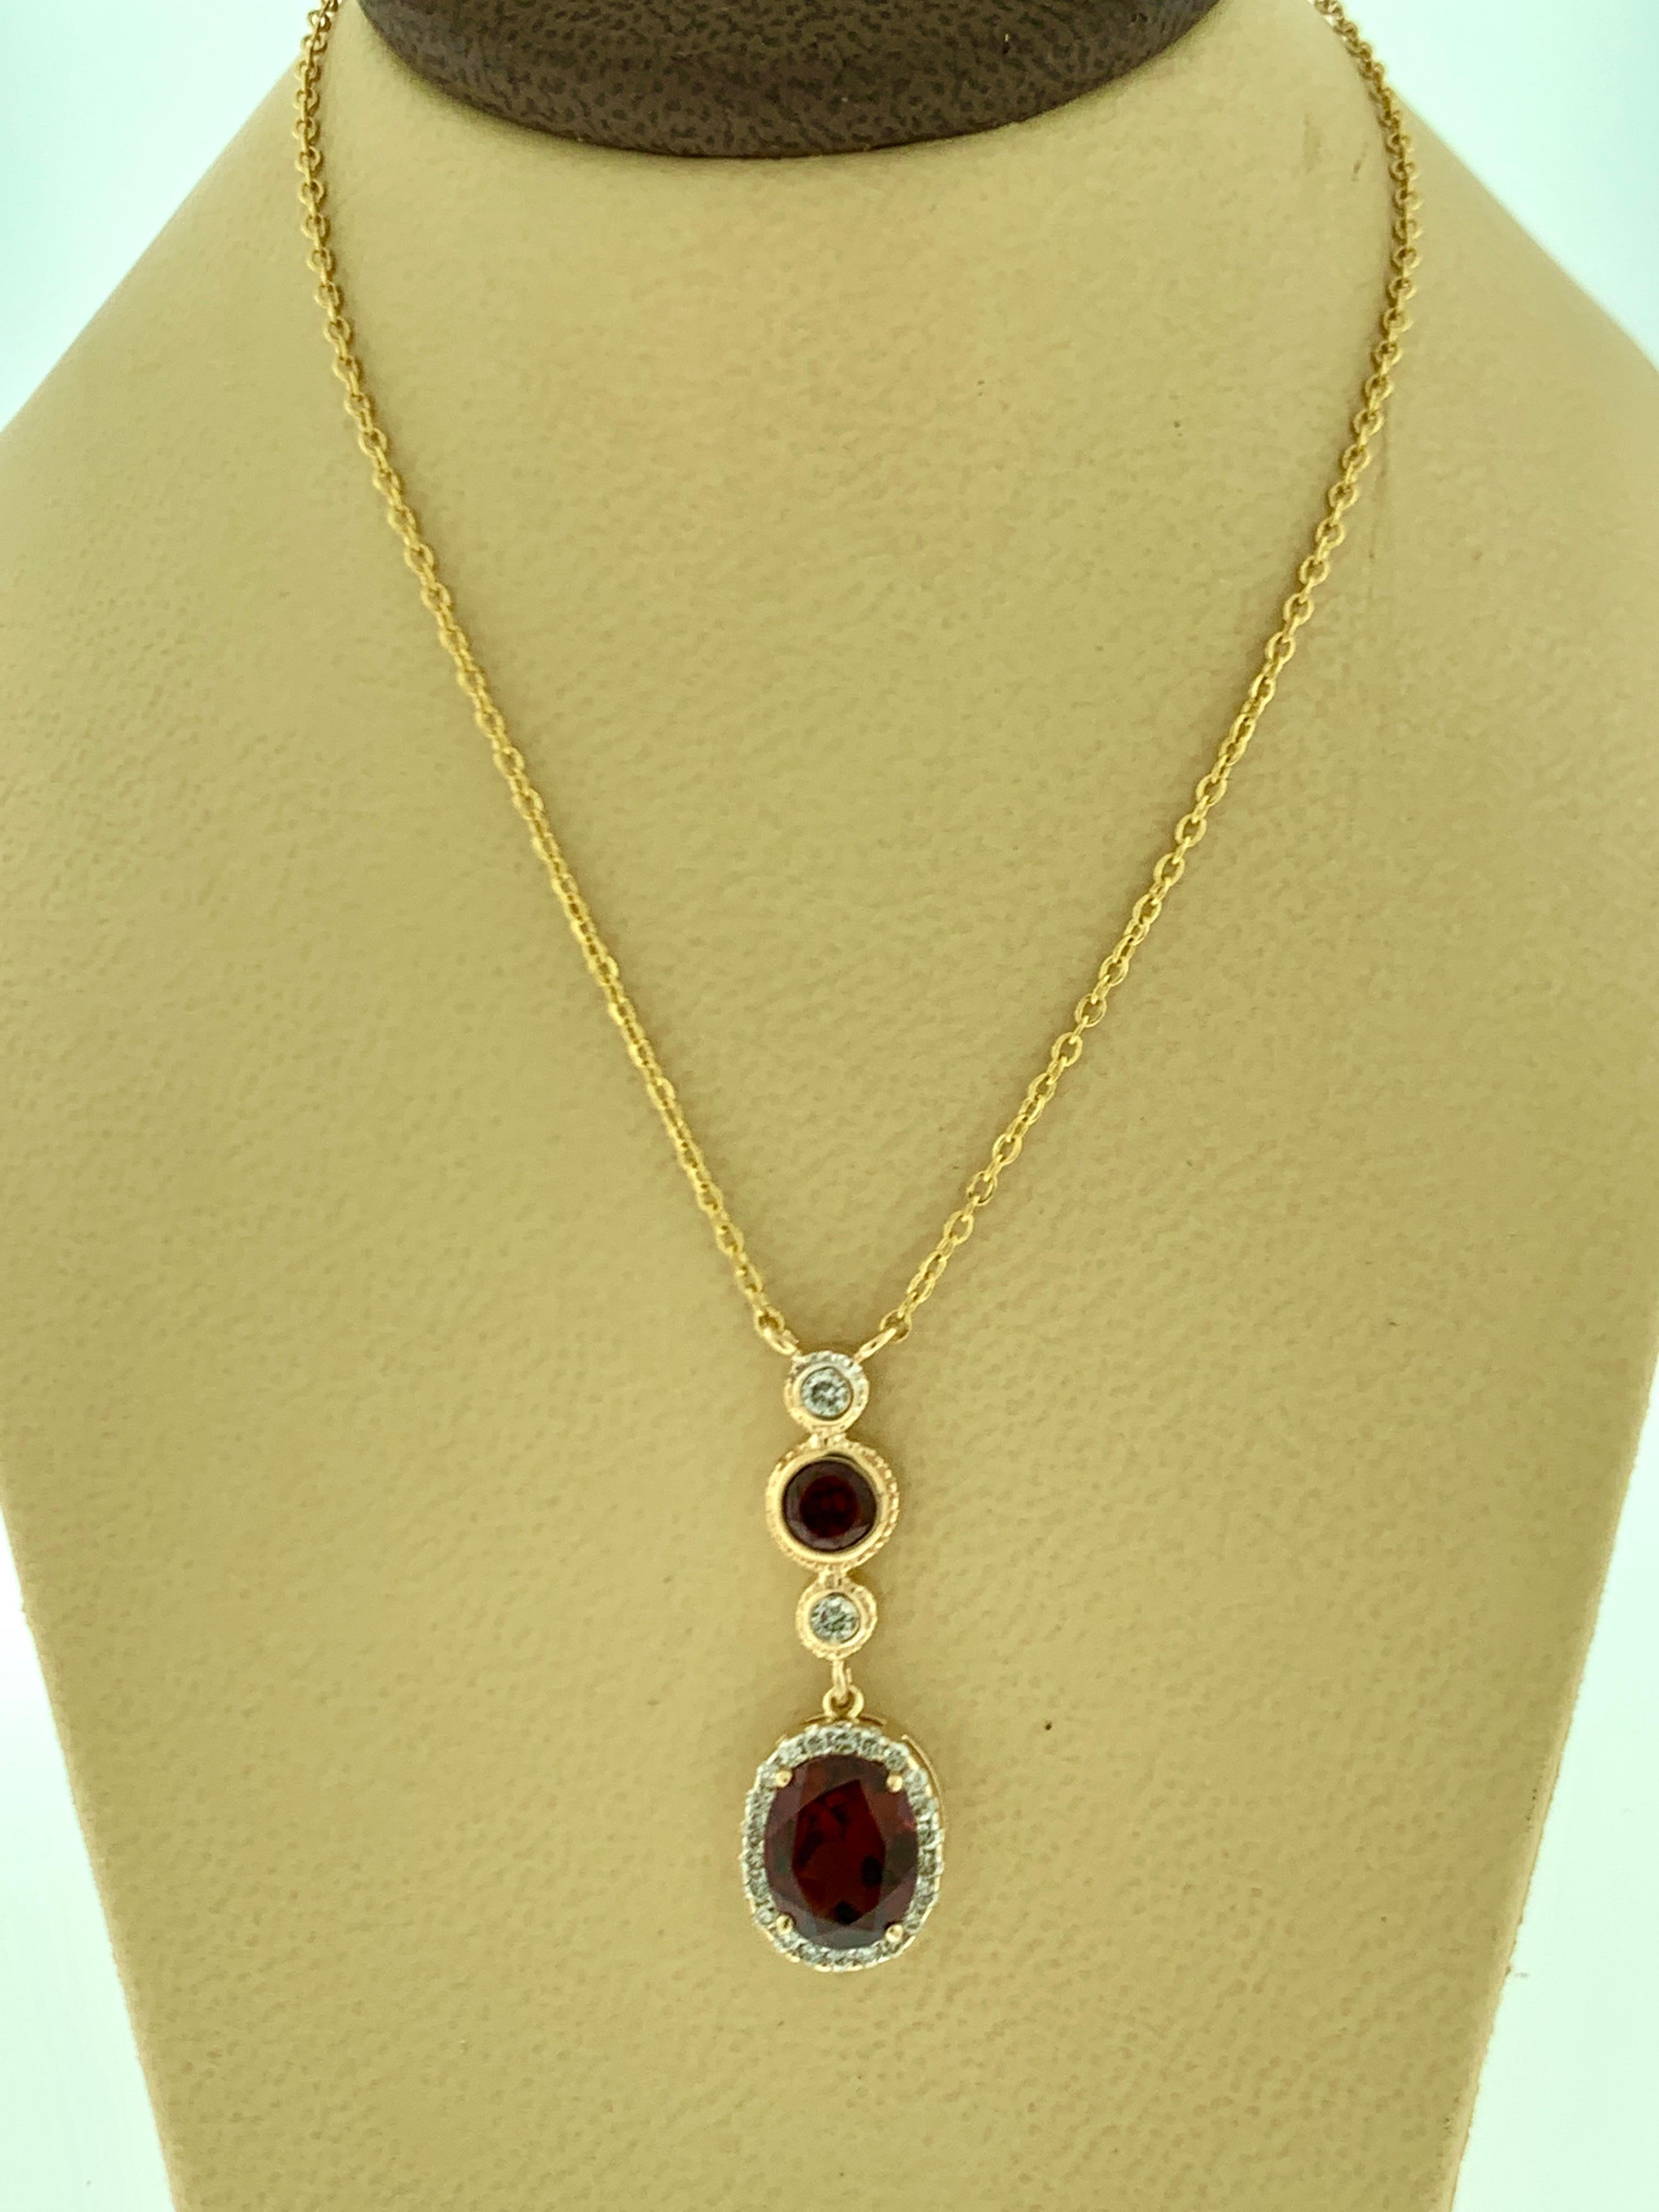 6 Carat Oval Shape Garnet and 0.6 Carat Diamond Necklace in 14 Karat Yellow Gold For Sale 2